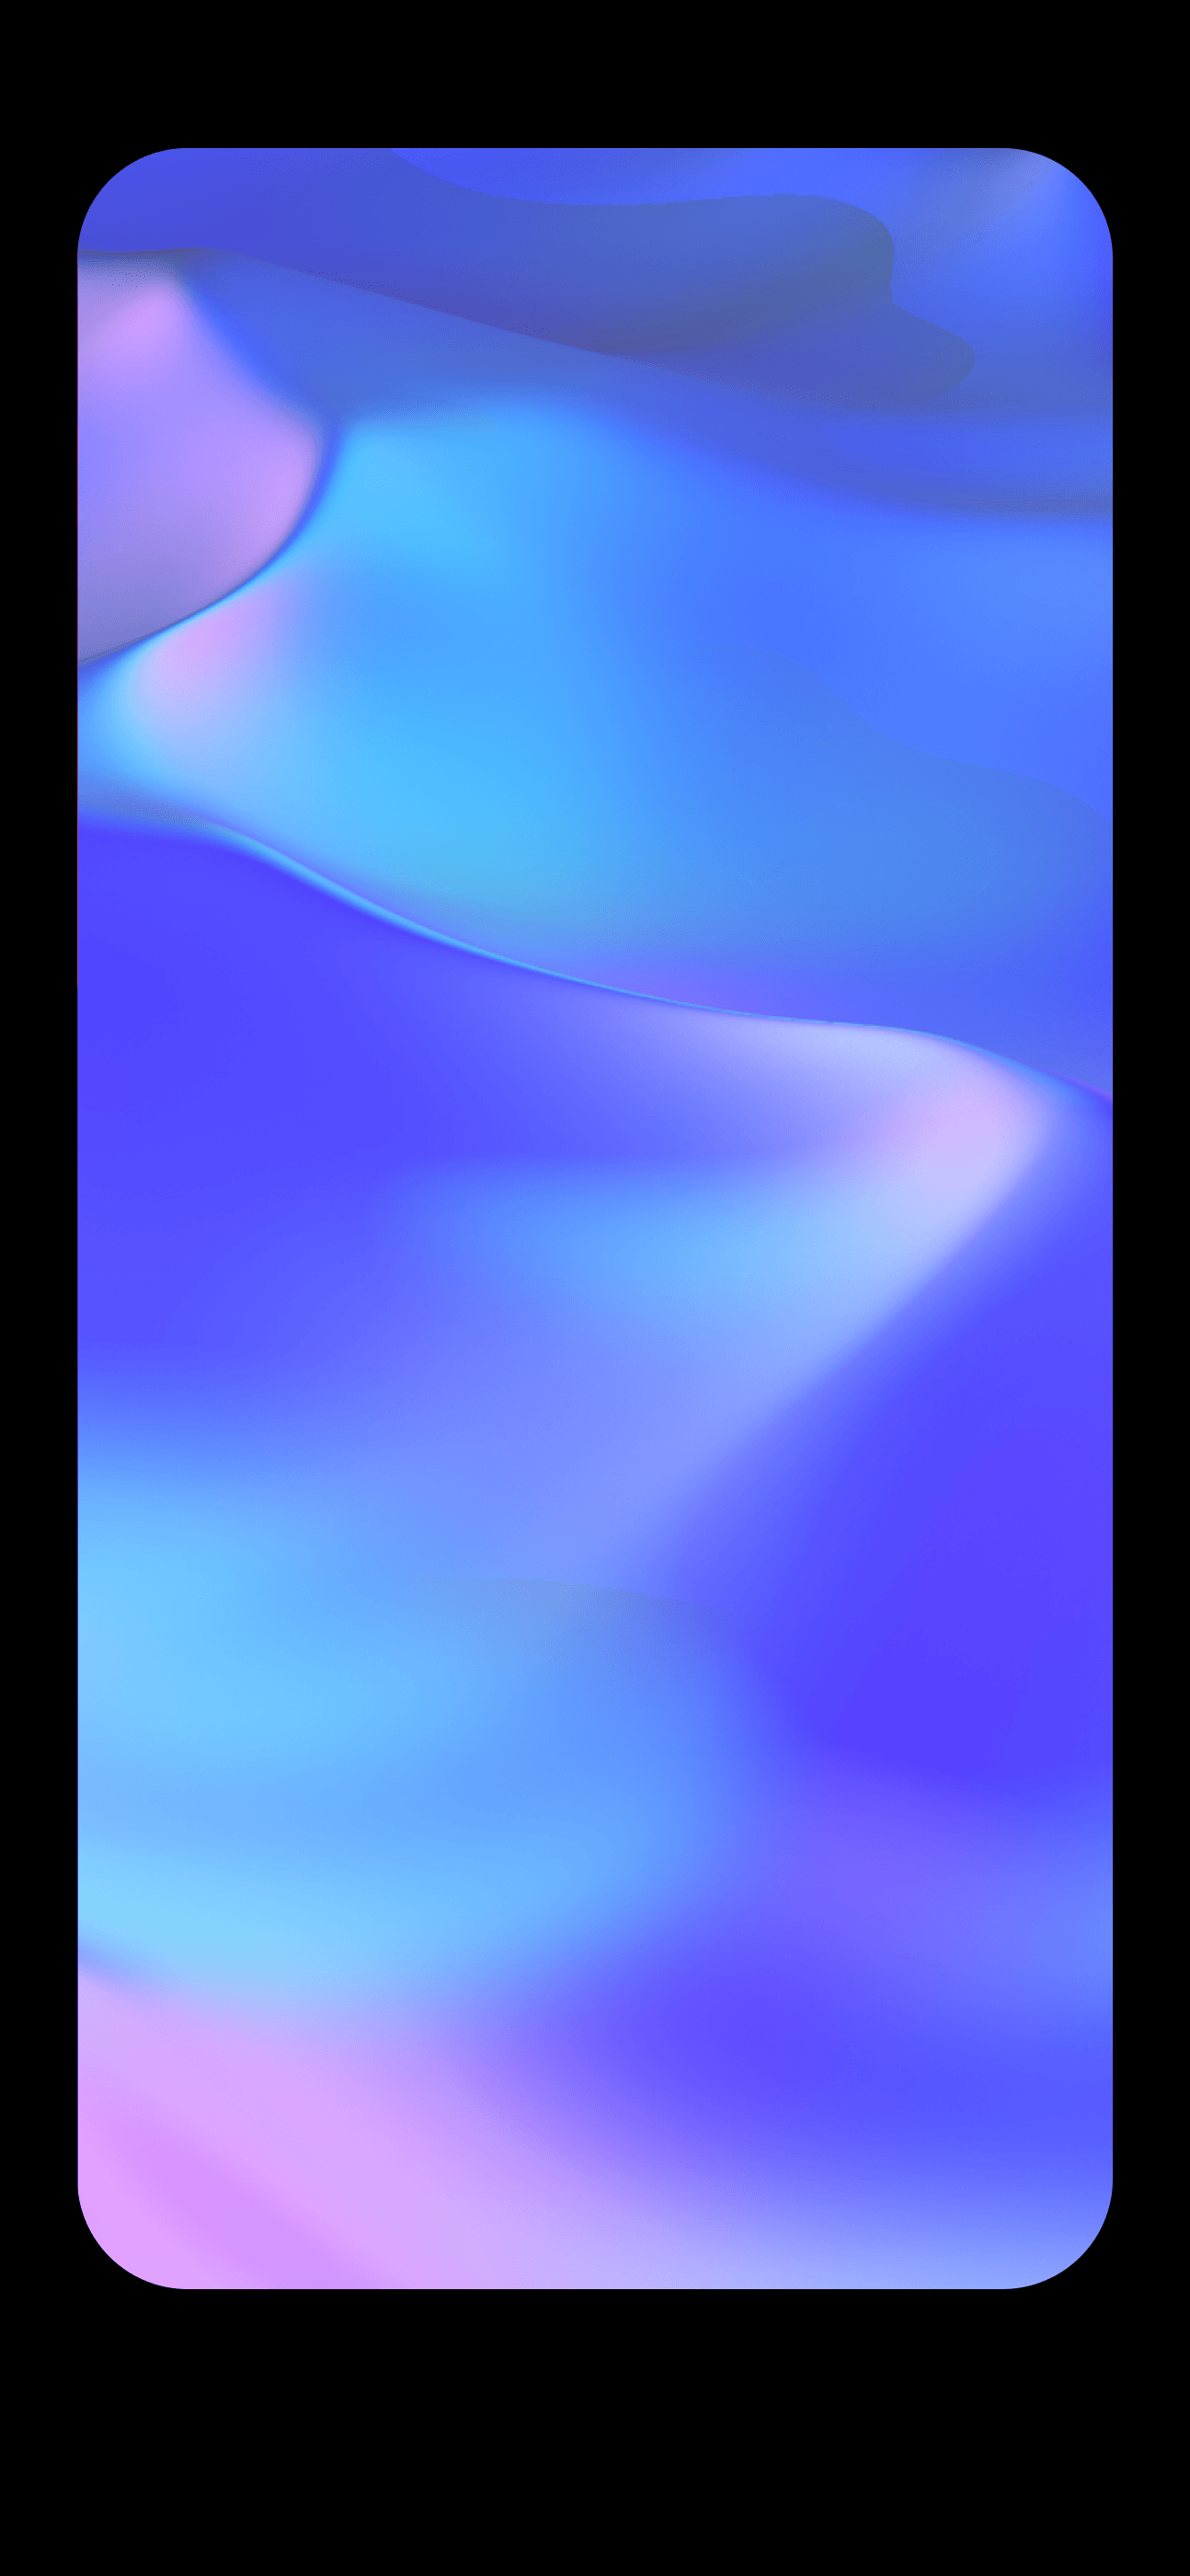 Hide the iPhone X's intrusive notch with these wallpaper. High